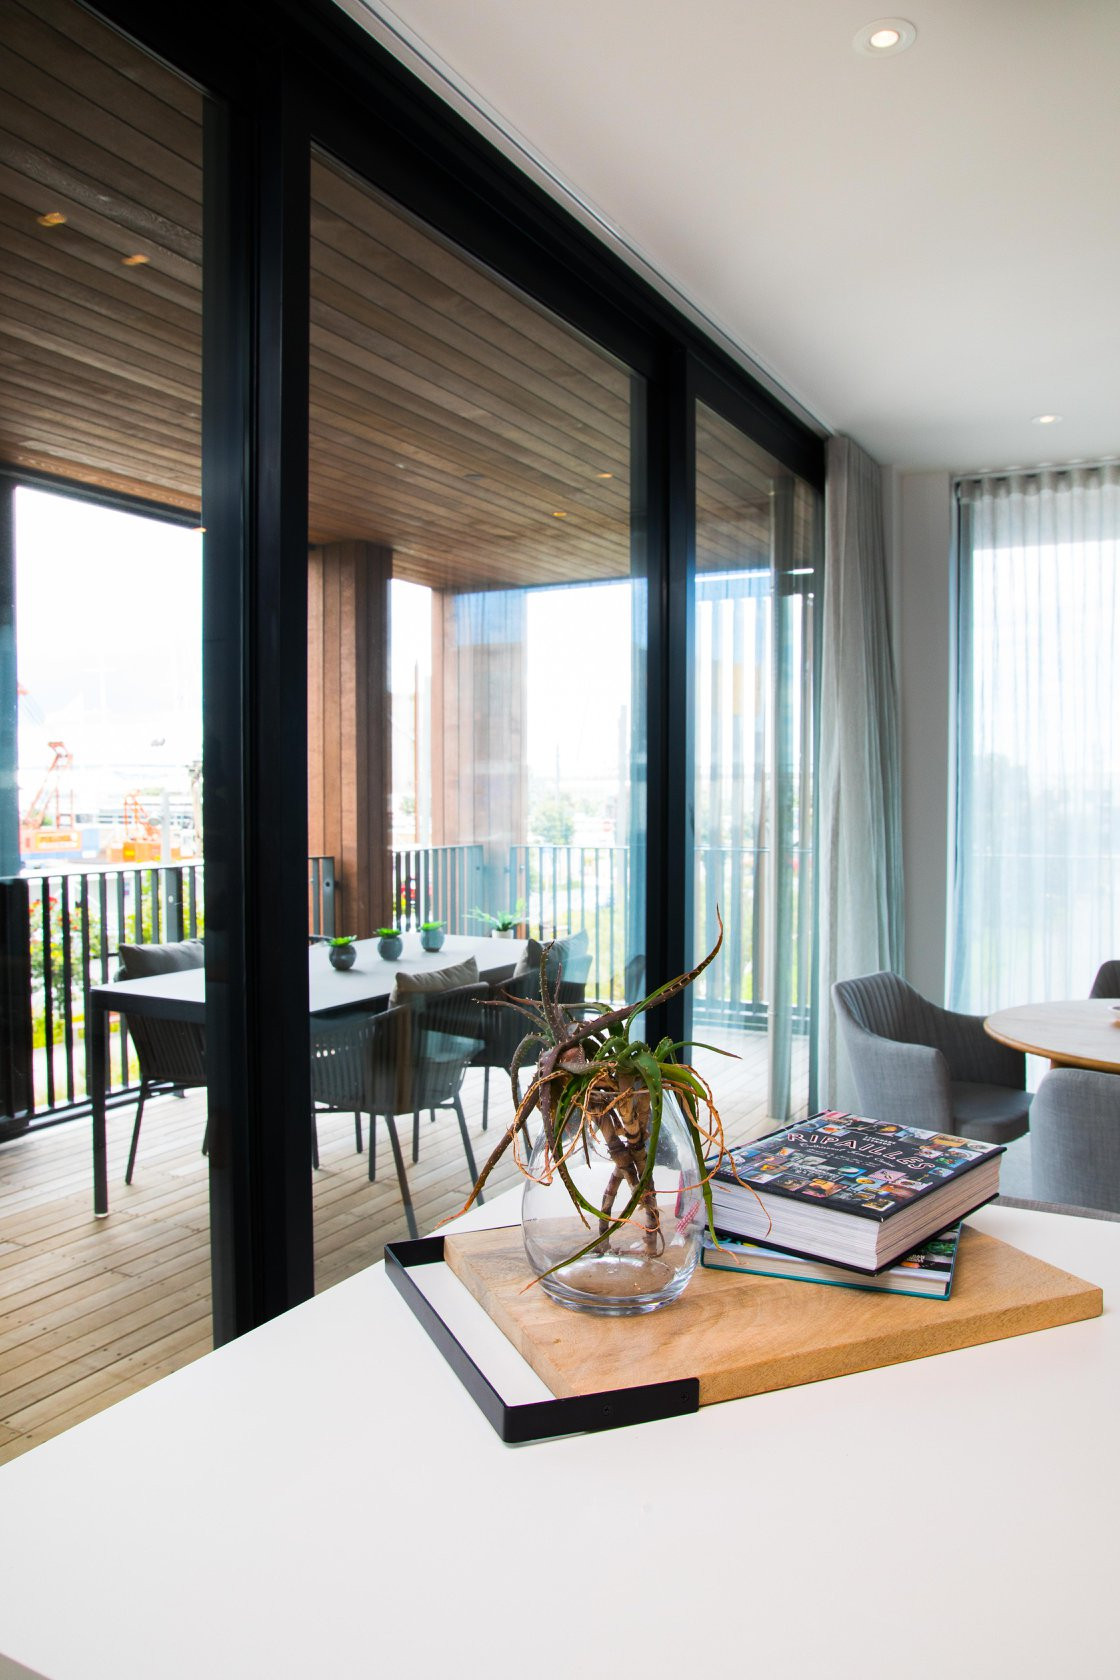 Interior dining area, featuring expansive windows that reveal a wooden exterior and decking